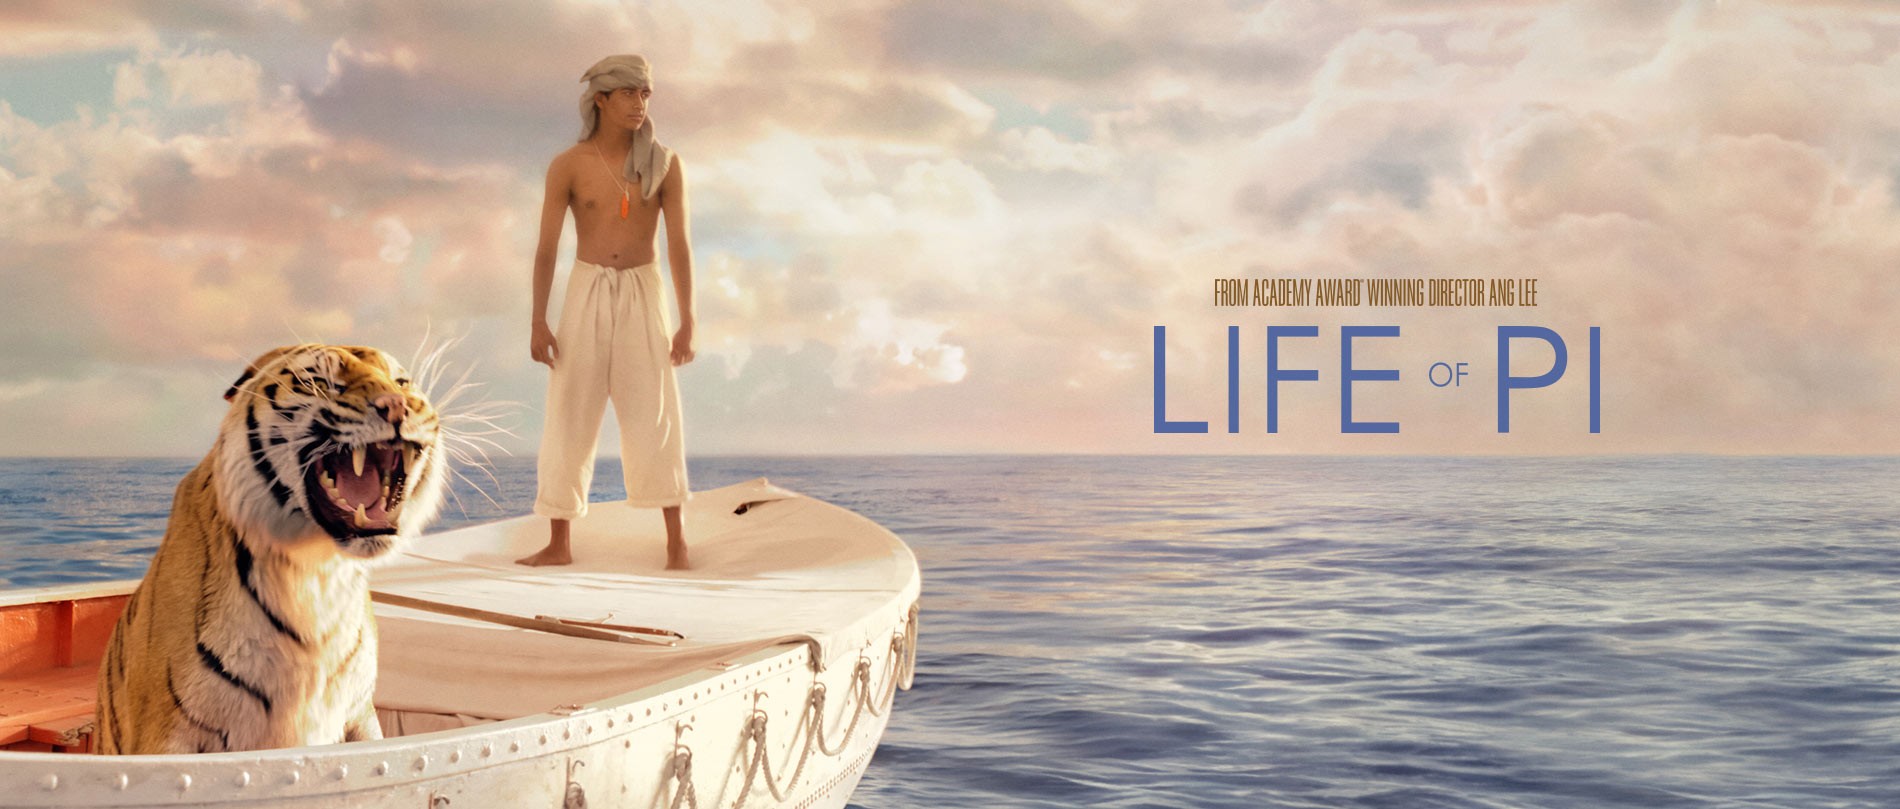 Images of Life Of Pi | 1900x809